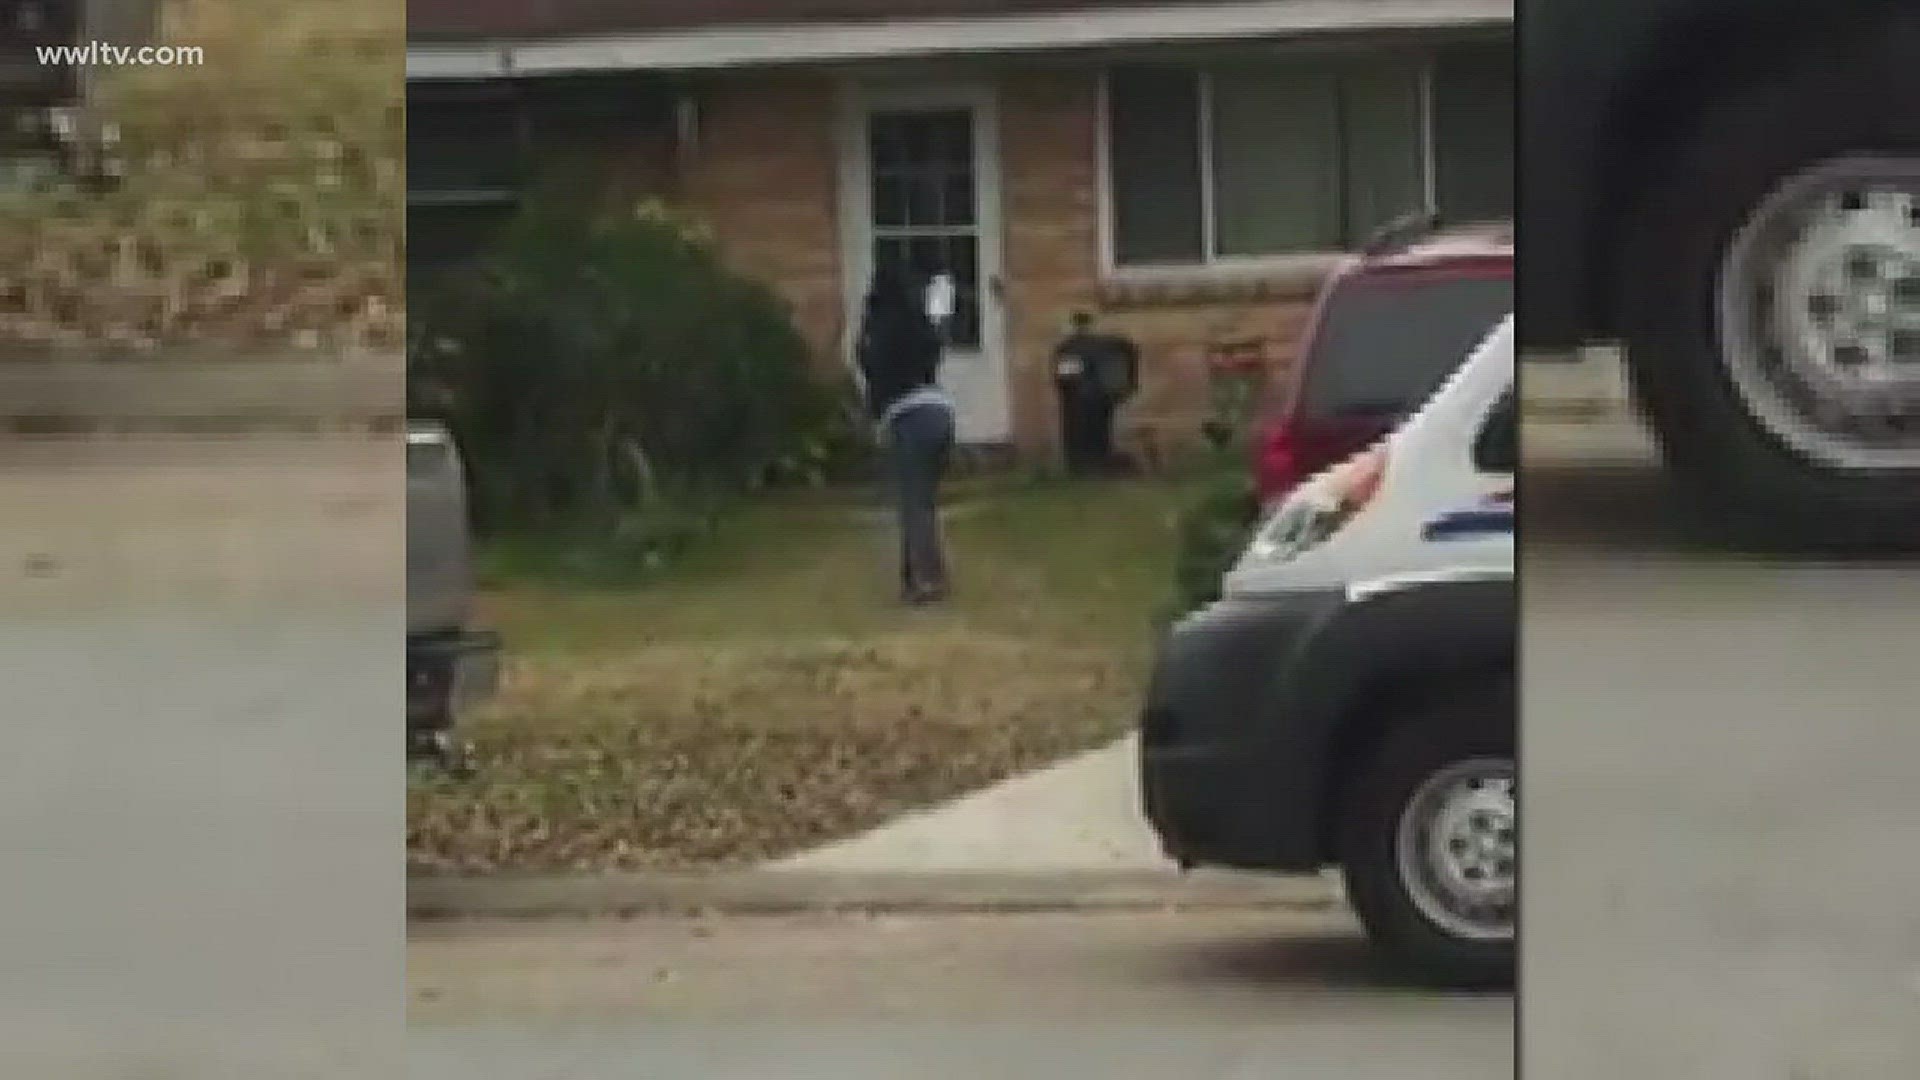 A Facebook video showing a mail carrier throwing packages at houses in the New Orleans area is drawing a lot of attention.